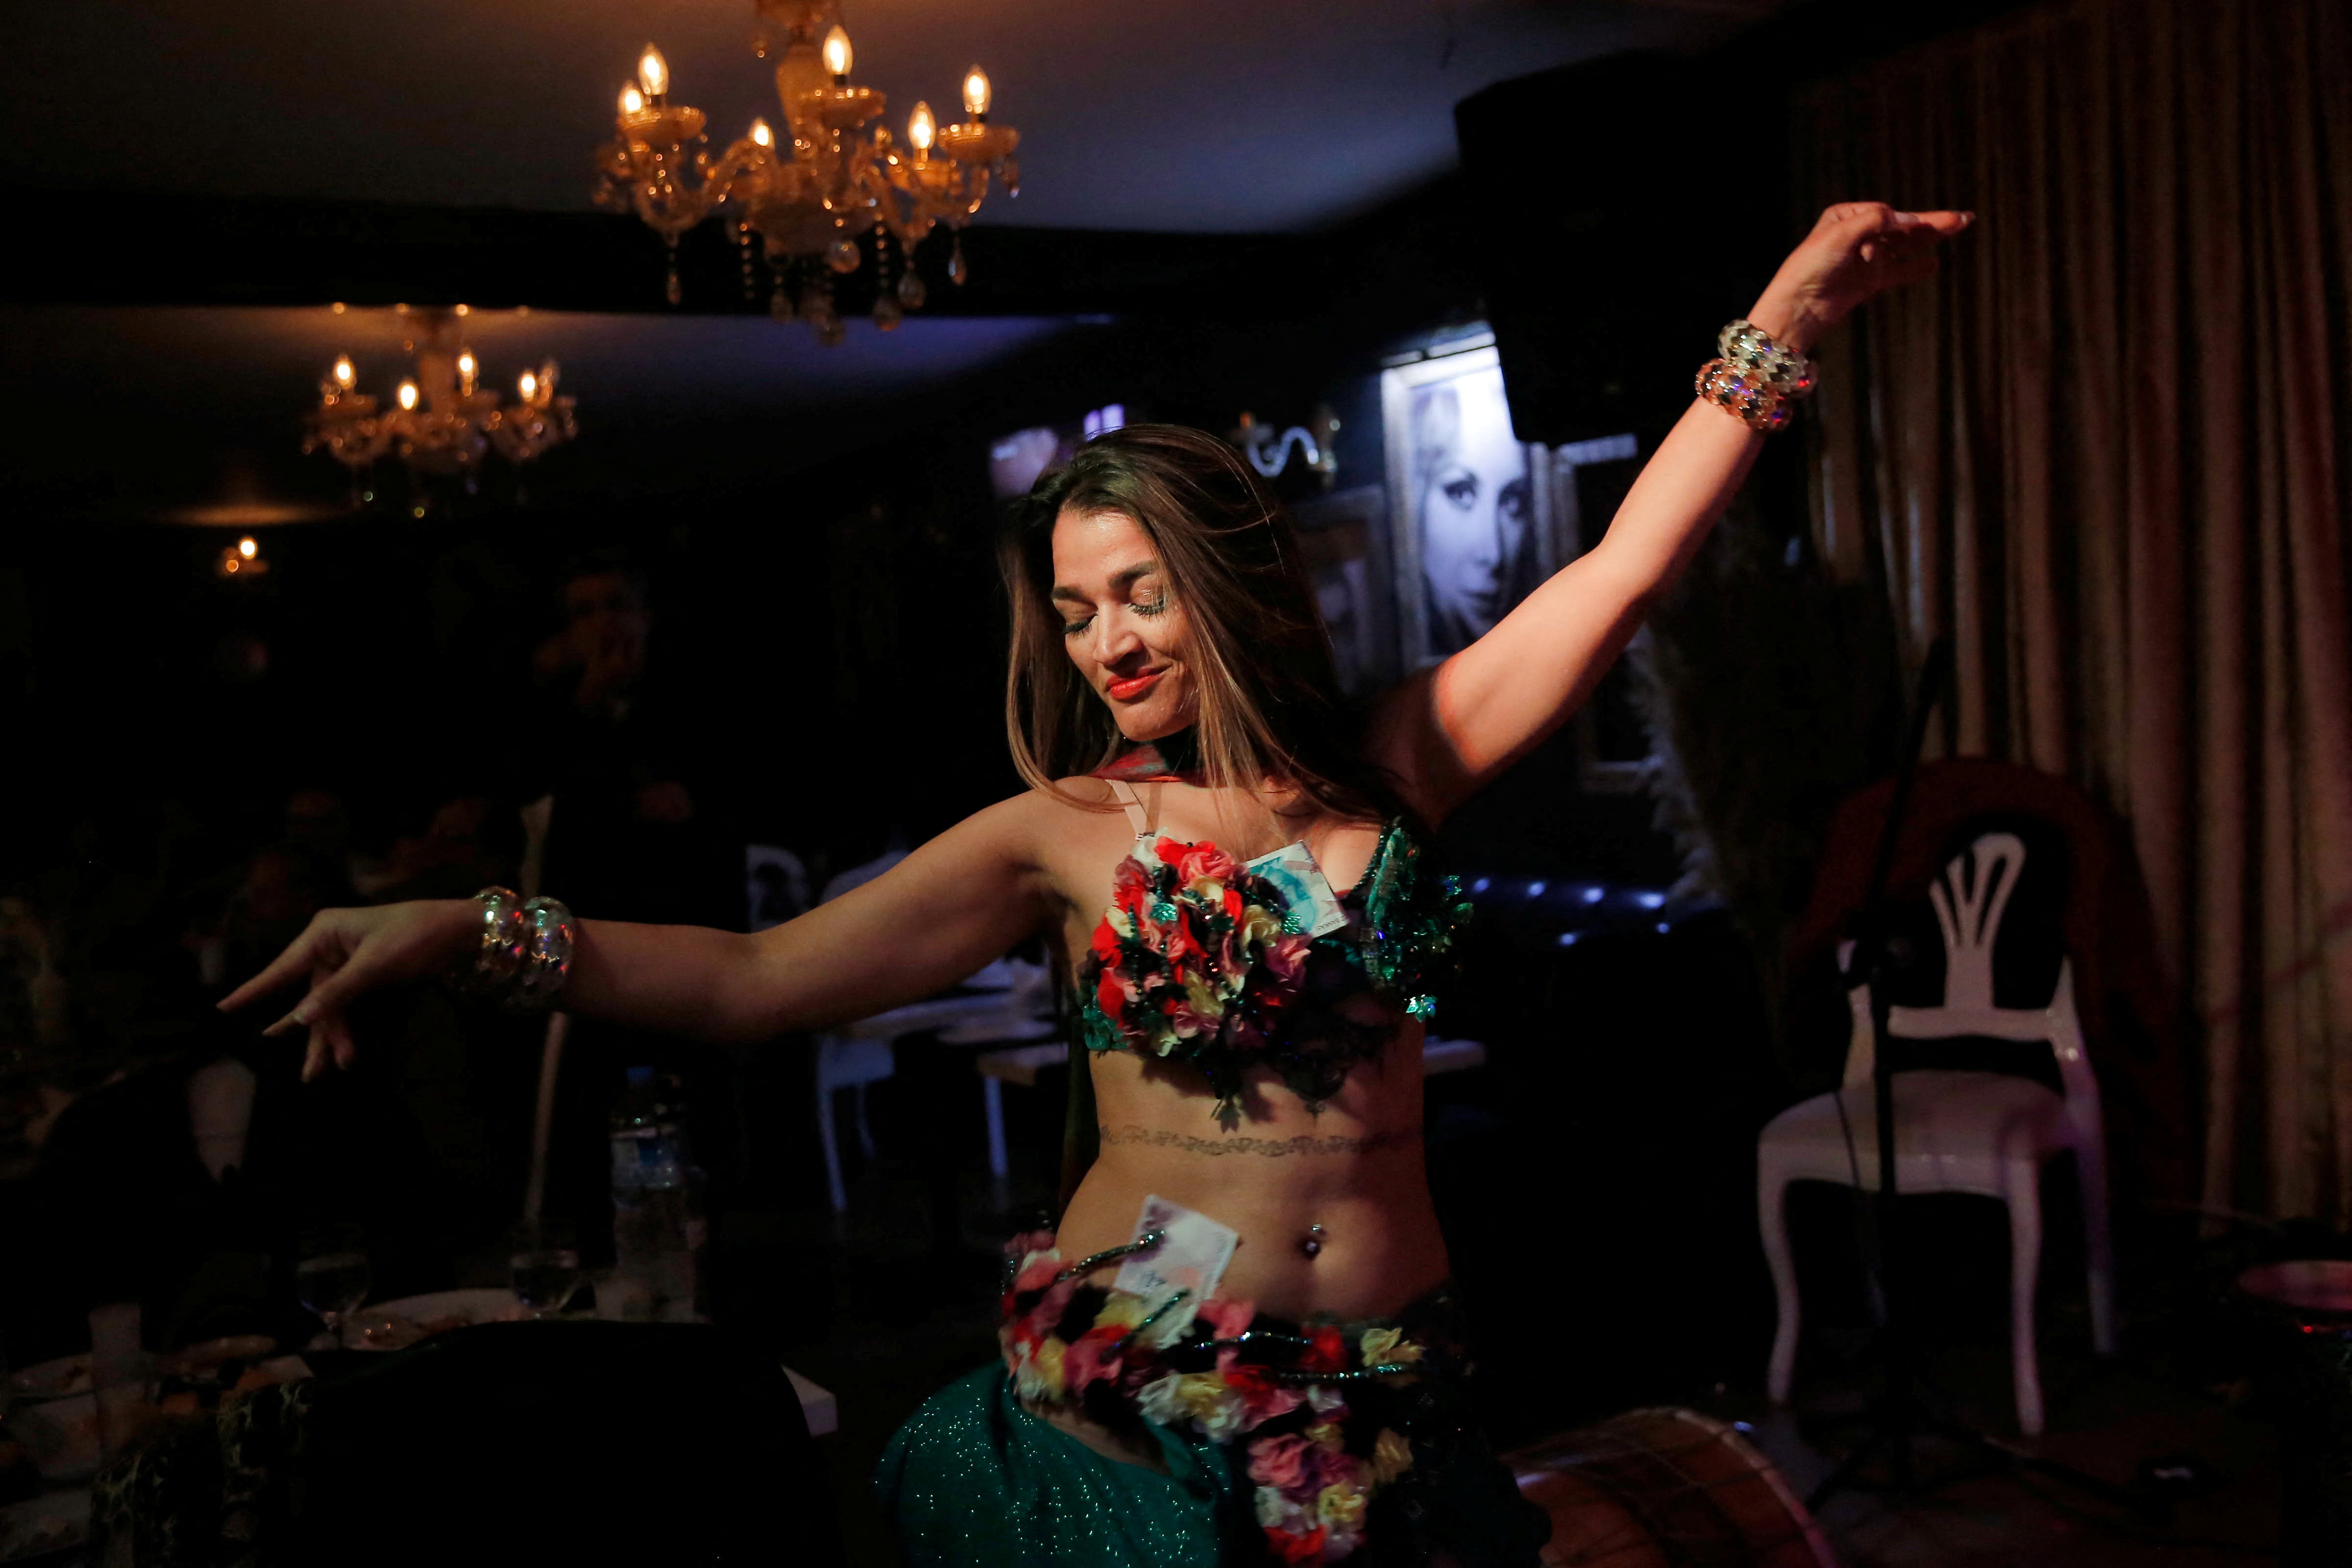 Turkish Belly Dancer Sex - Iranian dancer in Turkey says she believes protests will end Tehran's  'cruelty' | Reuters